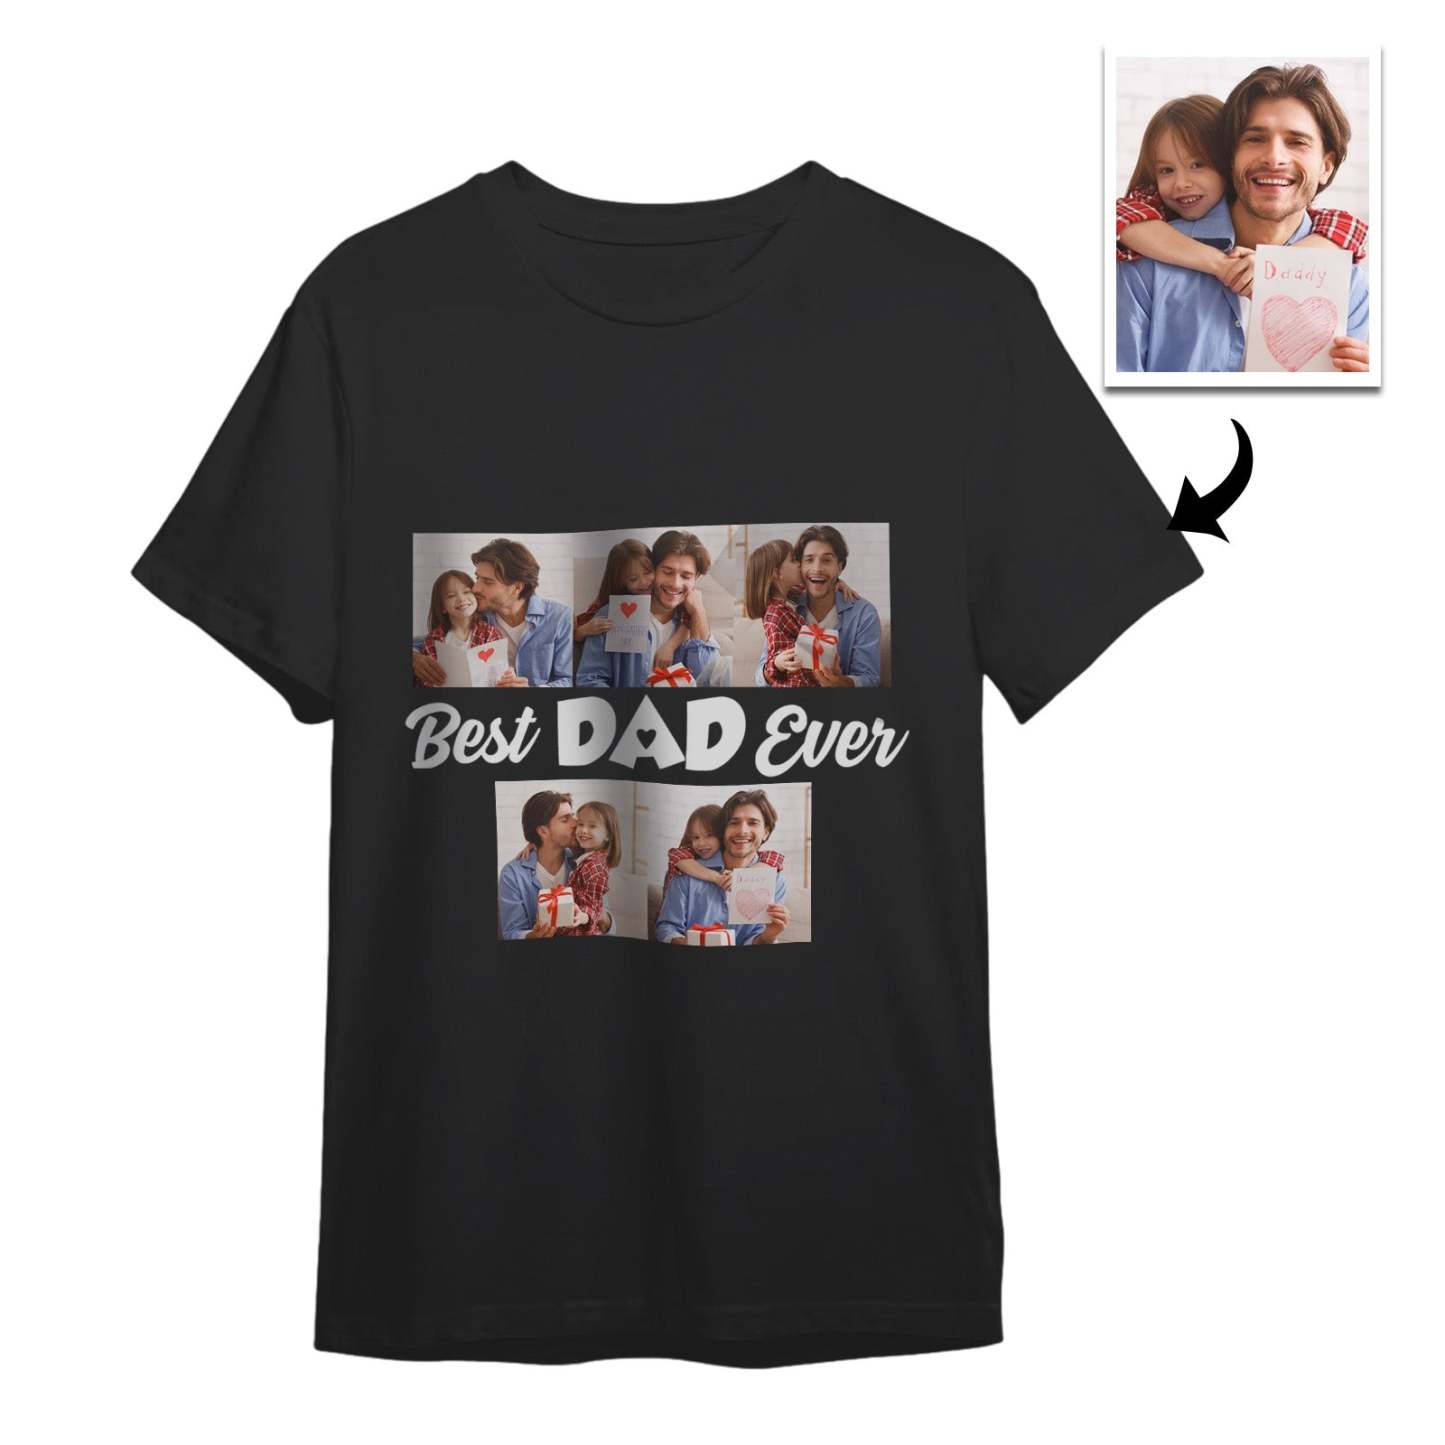 Custom 5 Photos T-Shirt With Best Dad Ever Personalized Photos T-Shirt Father's Day Gift - GetPhotoSocksUk